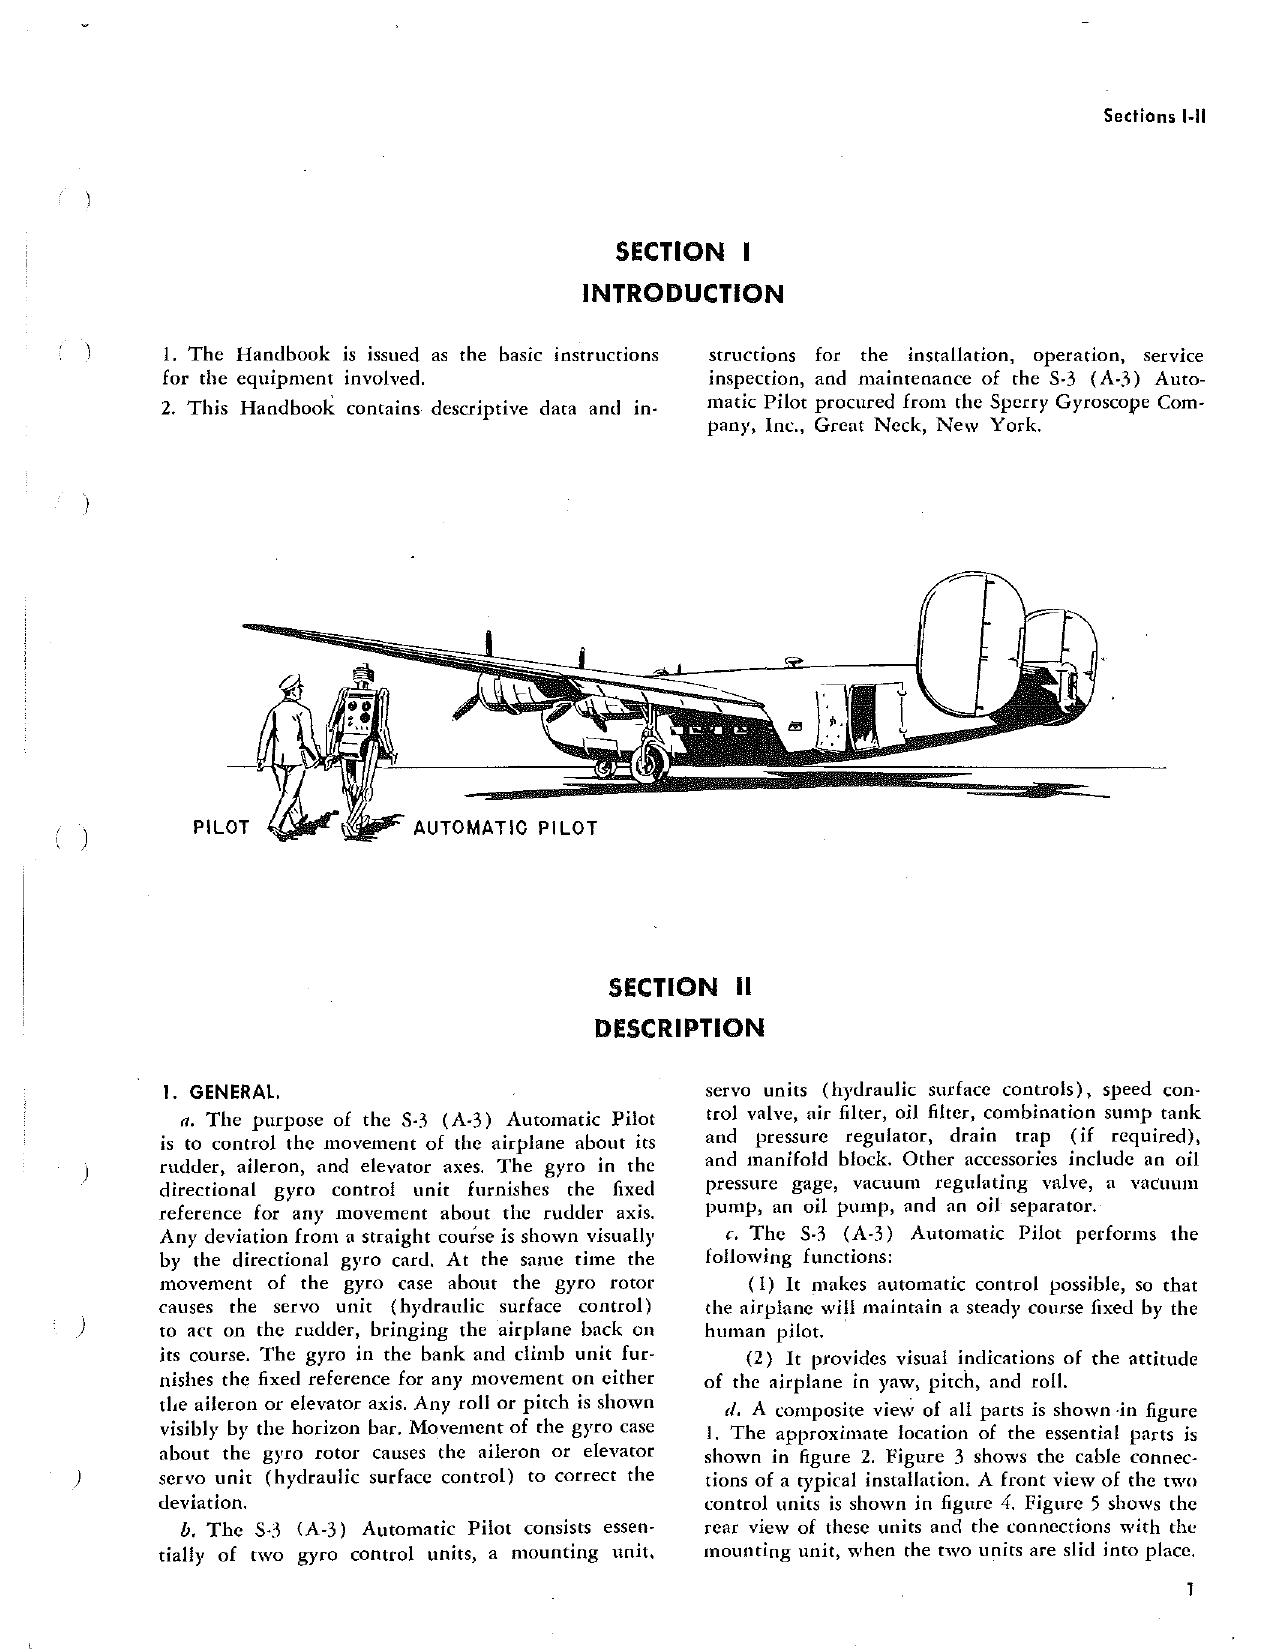 Sample page 6 from AirCorps Library document: Sperry Automatic Pilot Instruction for S-3 and A-3